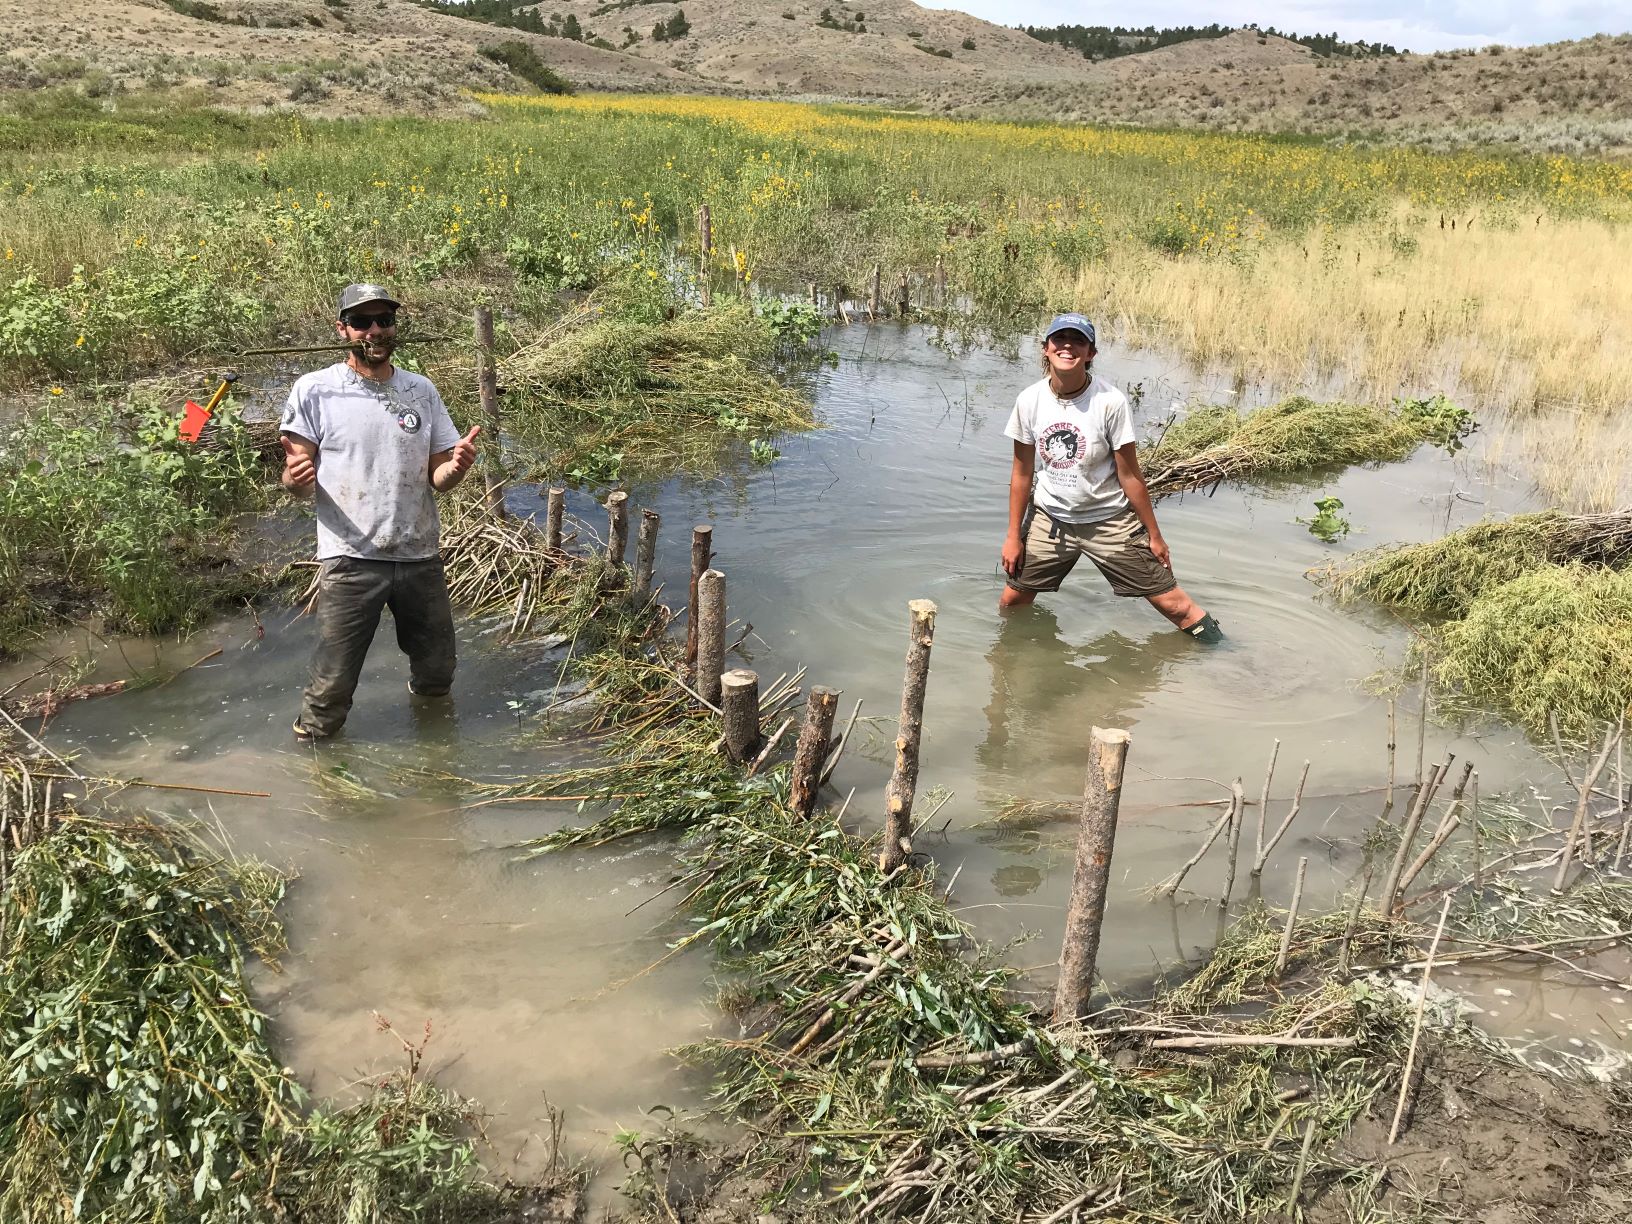 A Montana Conservation Corps (MCC) young-adult crew camps work of re-watering the prairie